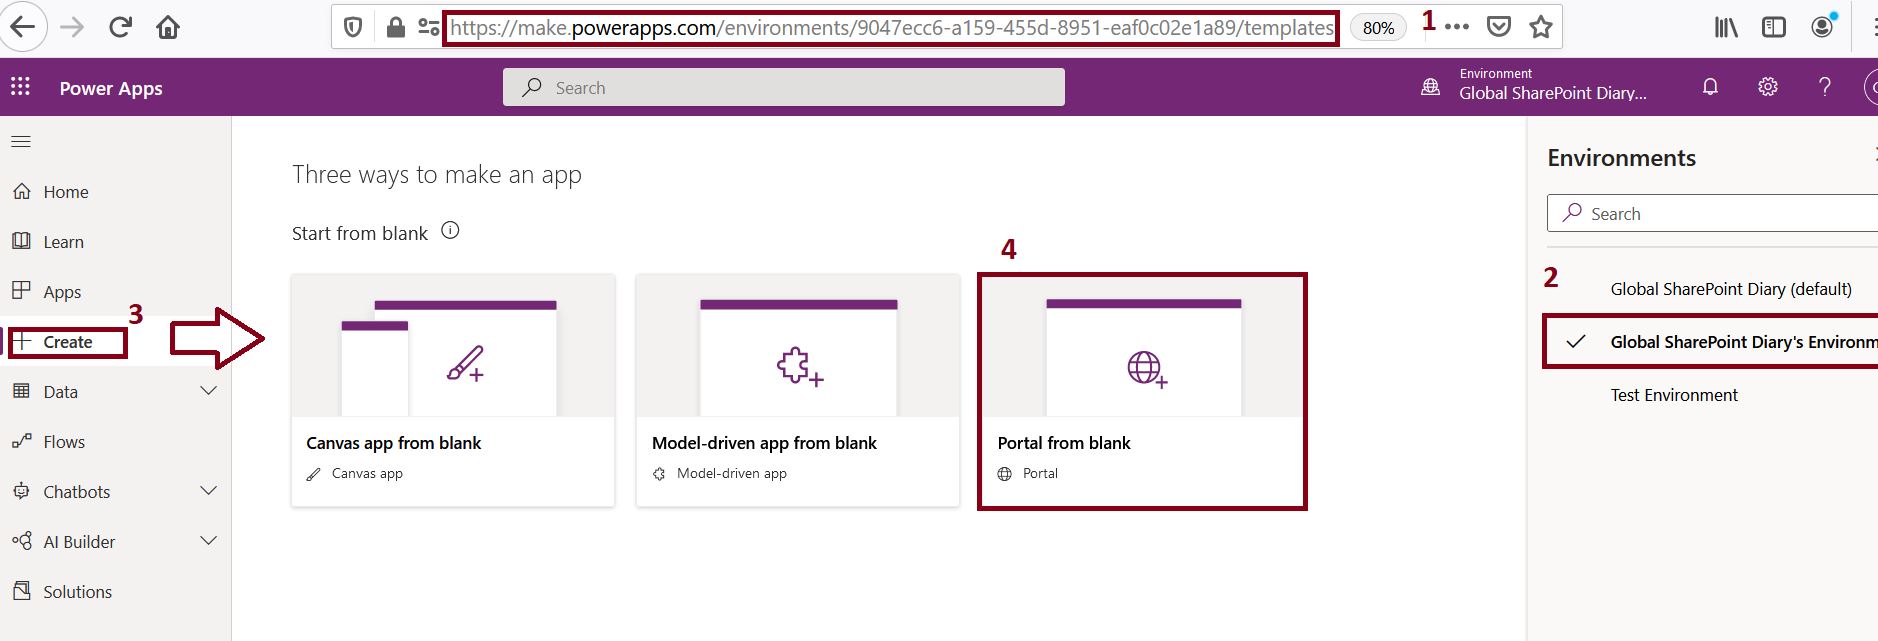 PowerApps portal from blank - steps to create Power Apps portal